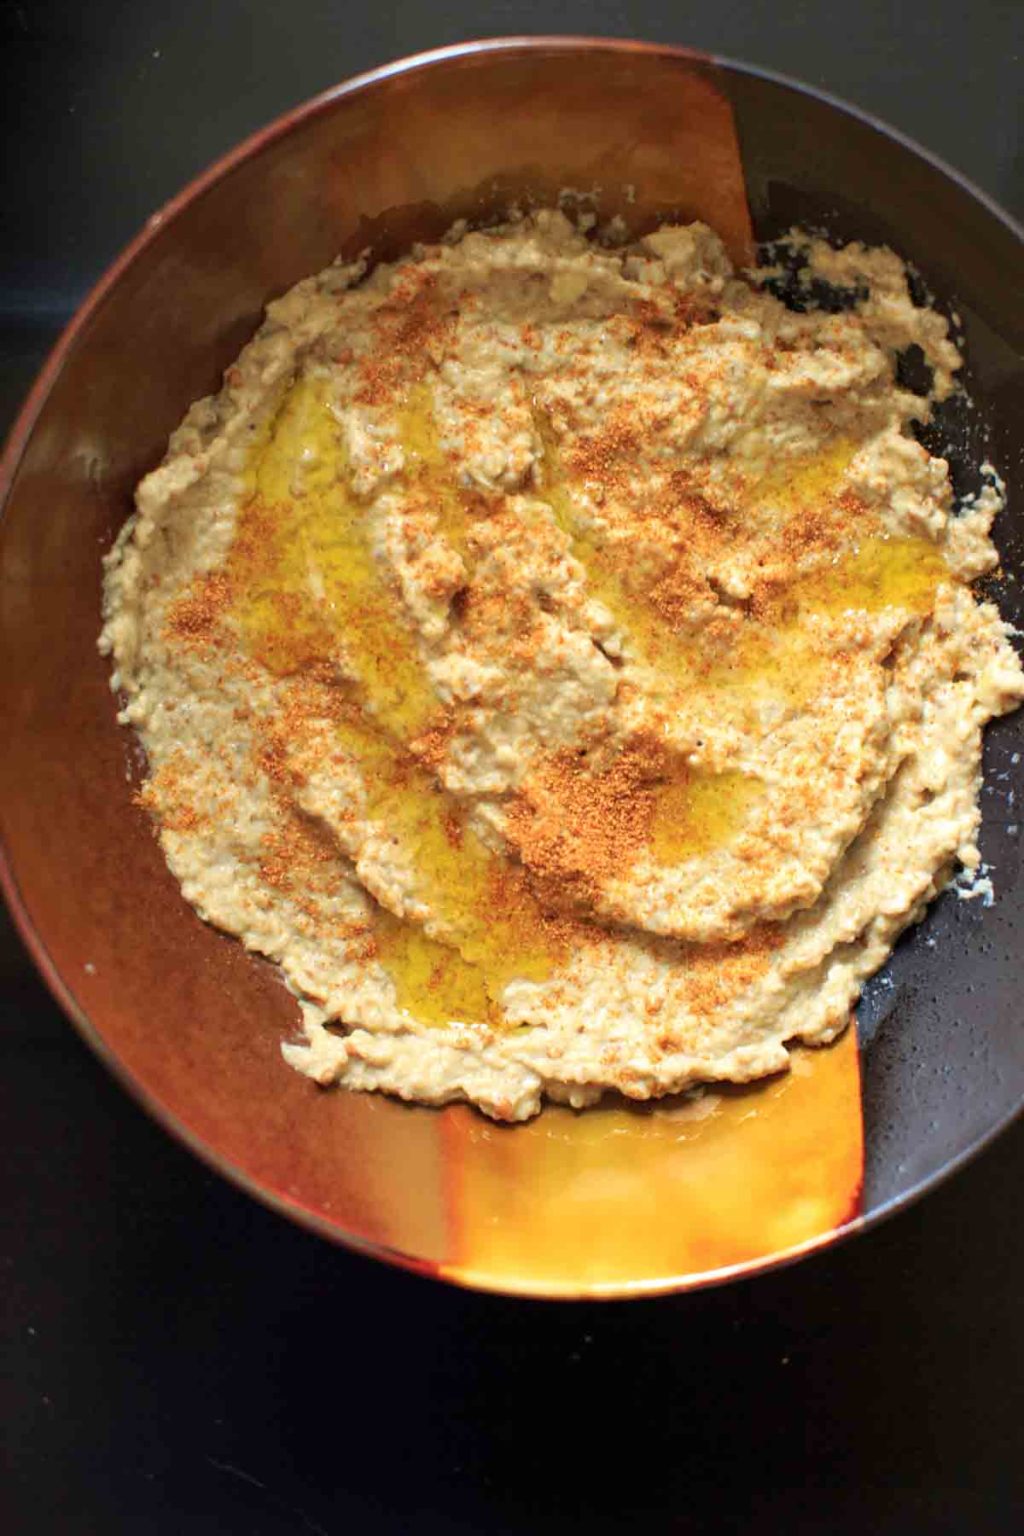 Spicy Baba Ganoush (Eggplant Dip) - with red pepper and sriracha, this appetizer is for you spicy food lovers!